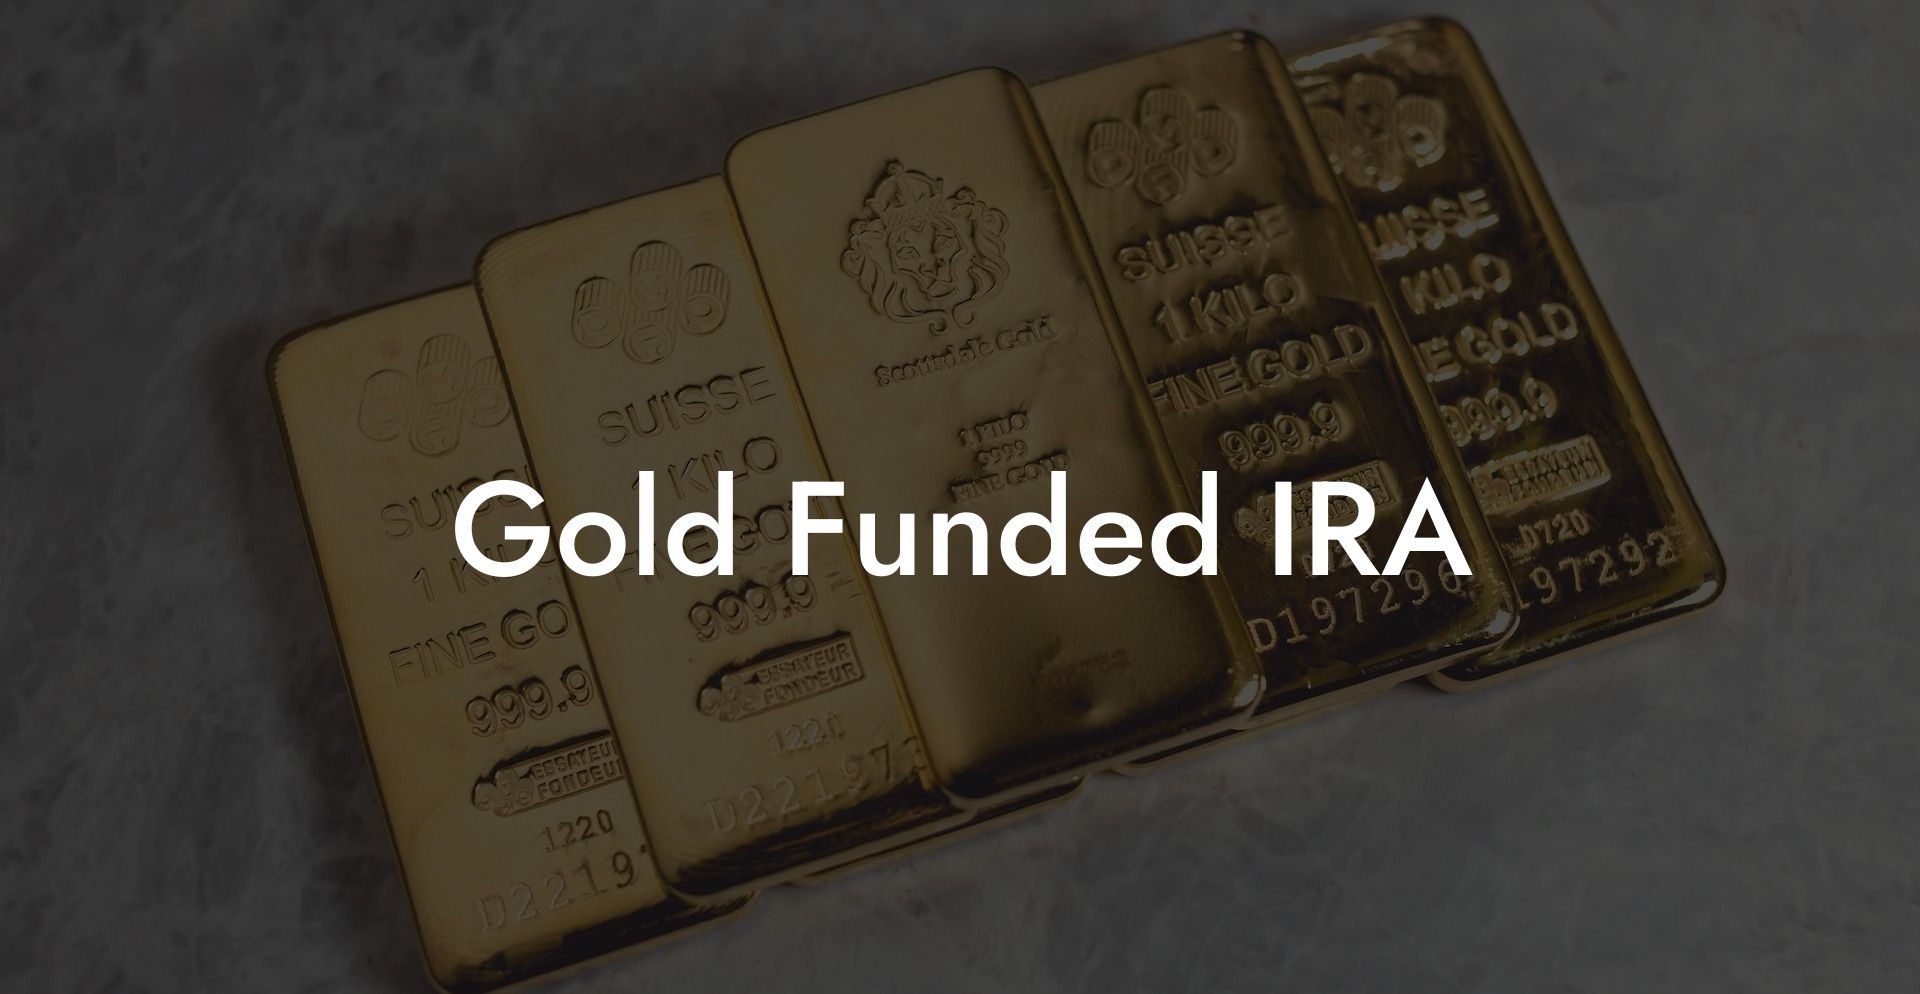 Gold Funded IRA